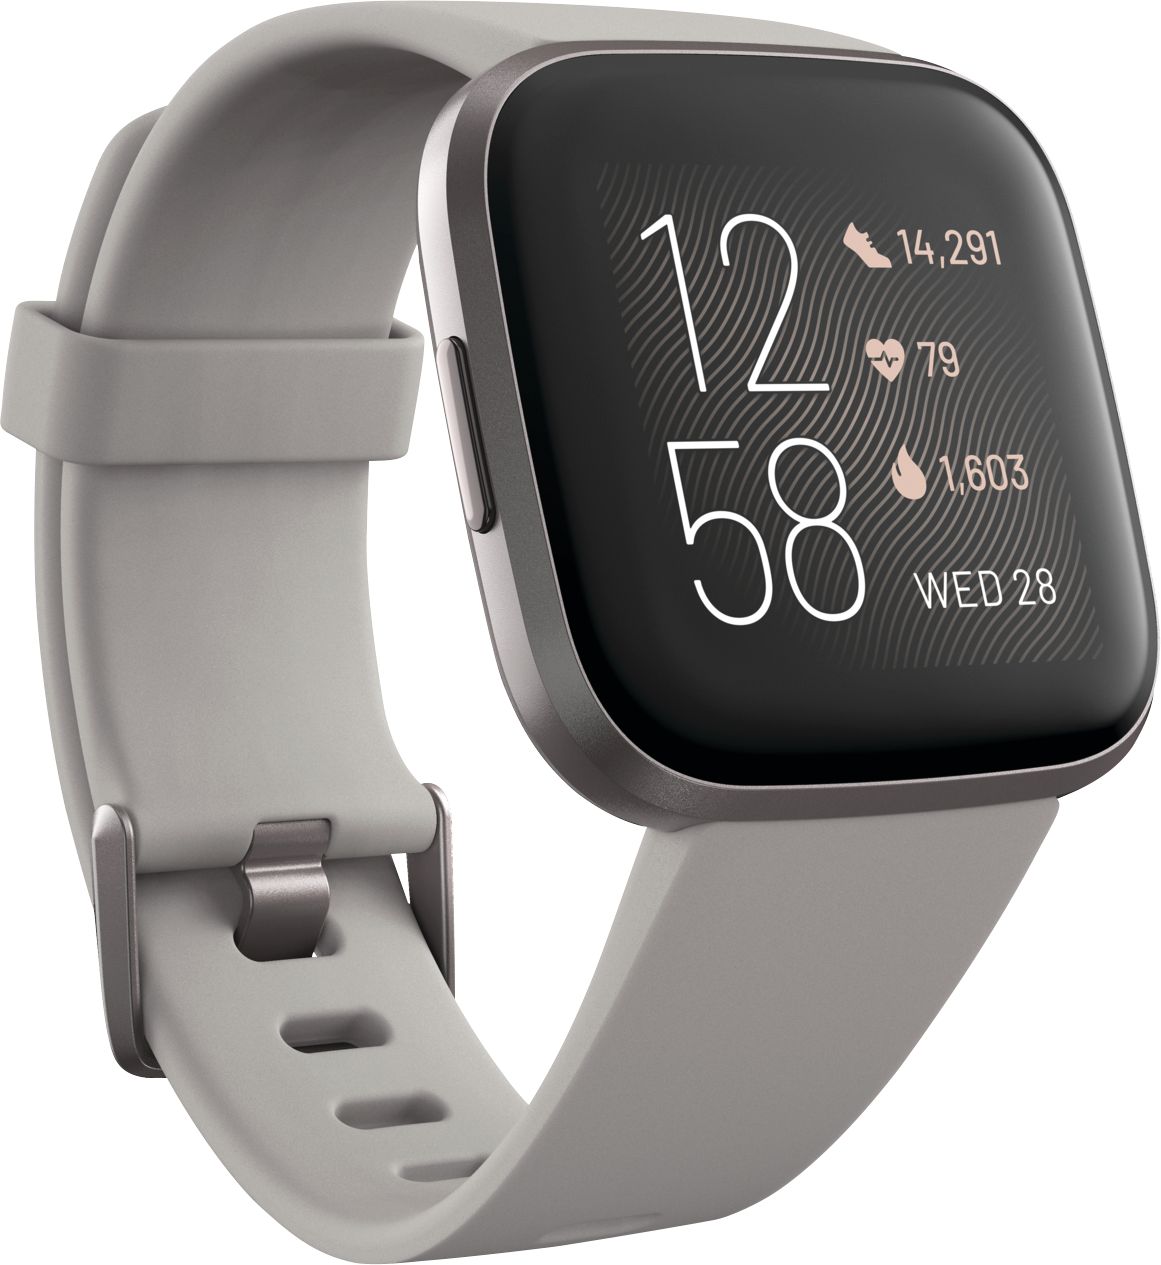 Angle View: Apple Watch SE (1st Generation GPS) 40mm Silver Aluminum Case with Abyss Blue Sport Band - Silver